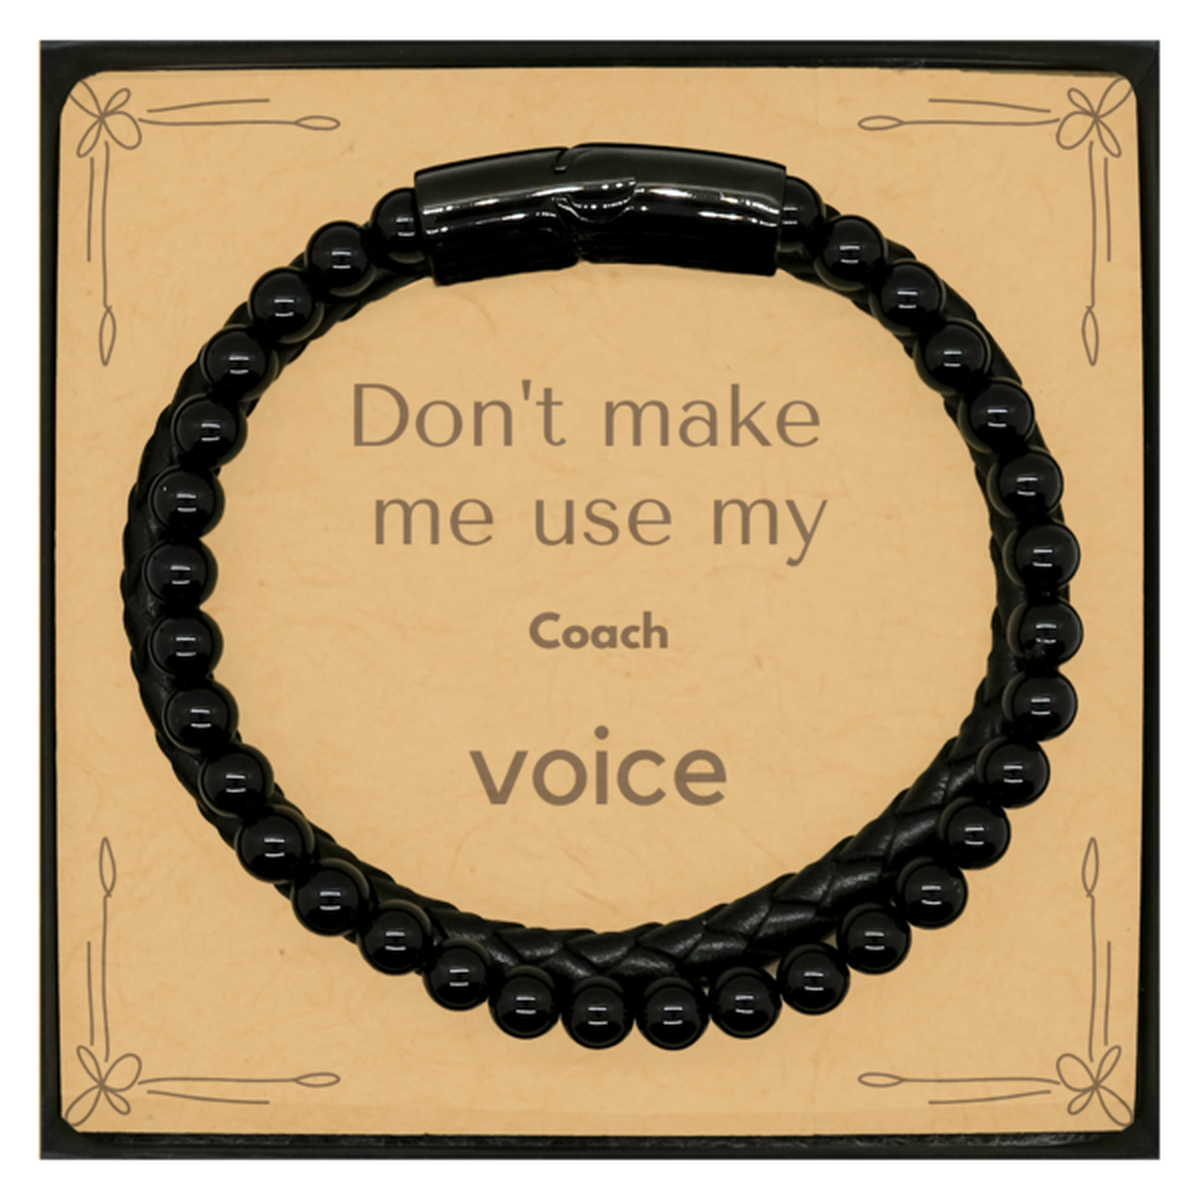 Don't make me use my Coach voice, Sarcasm Coach Card Gifts, Christmas Coach Stone Leather Bracelets Birthday Unique Gifts For Coach Coworkers, Men, Women, Colleague, Friends